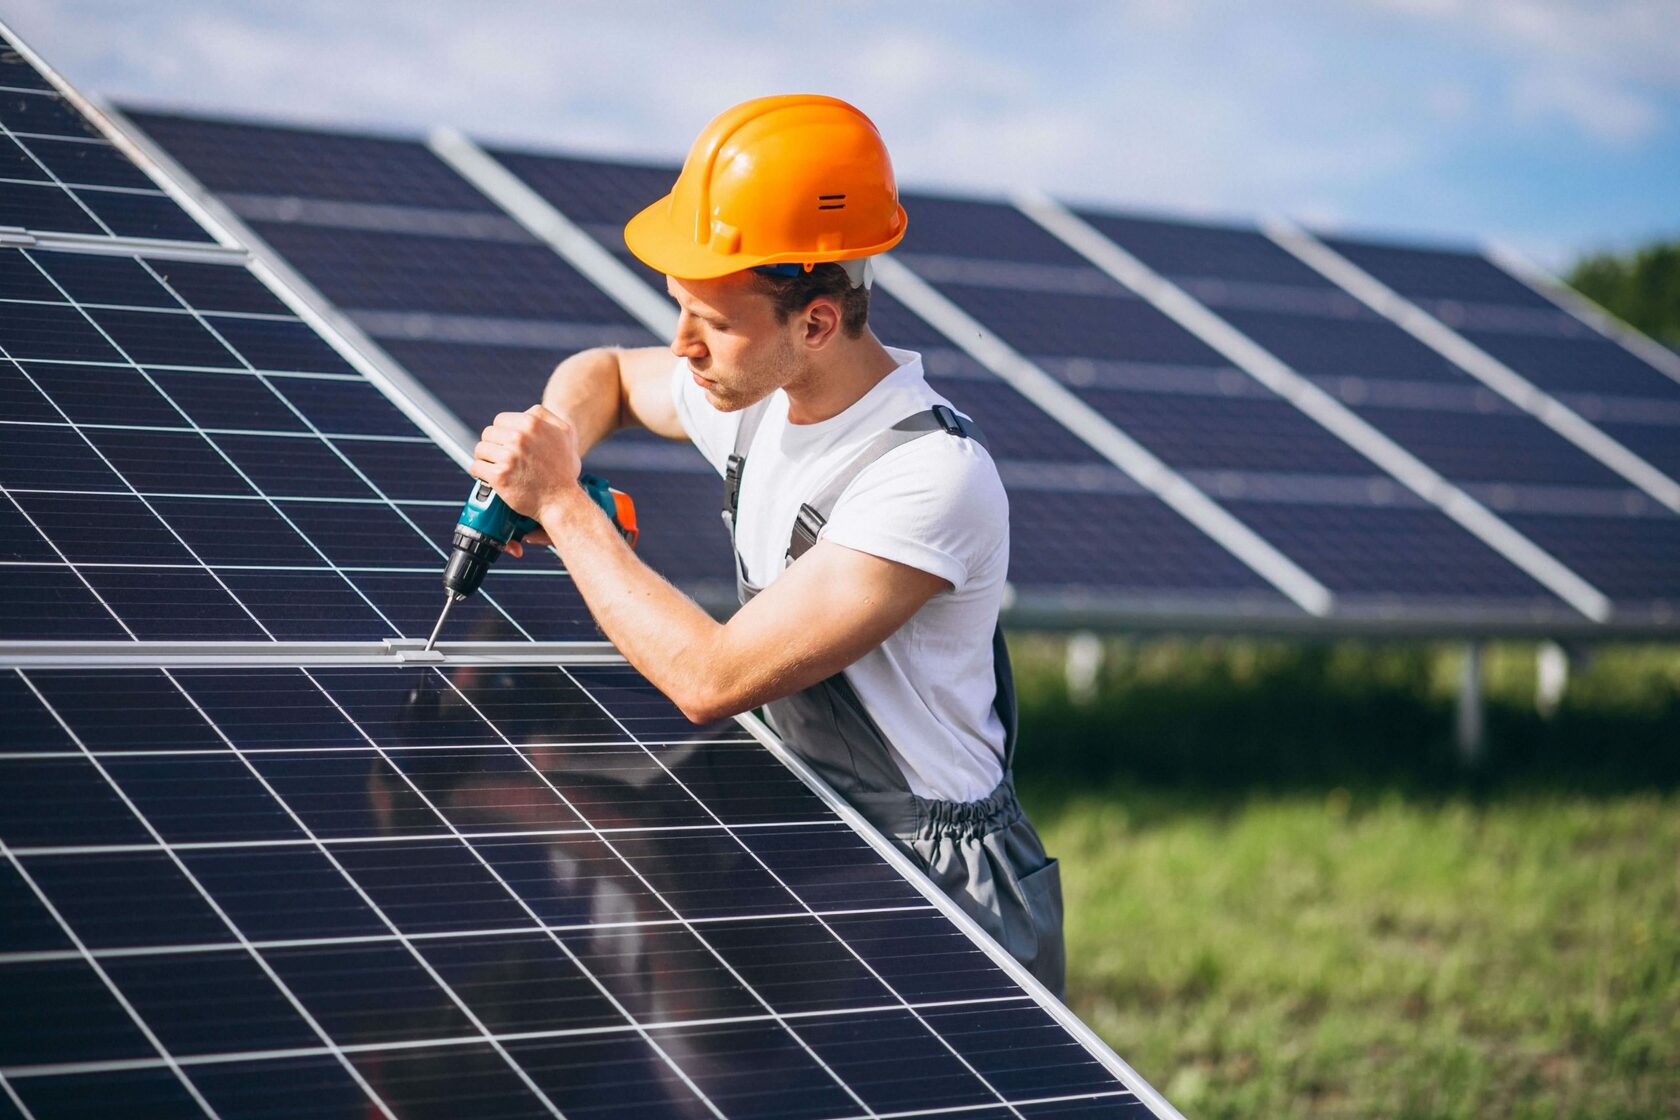 Importance of Choosing a Reputable and Experienced Solar Panel Installer